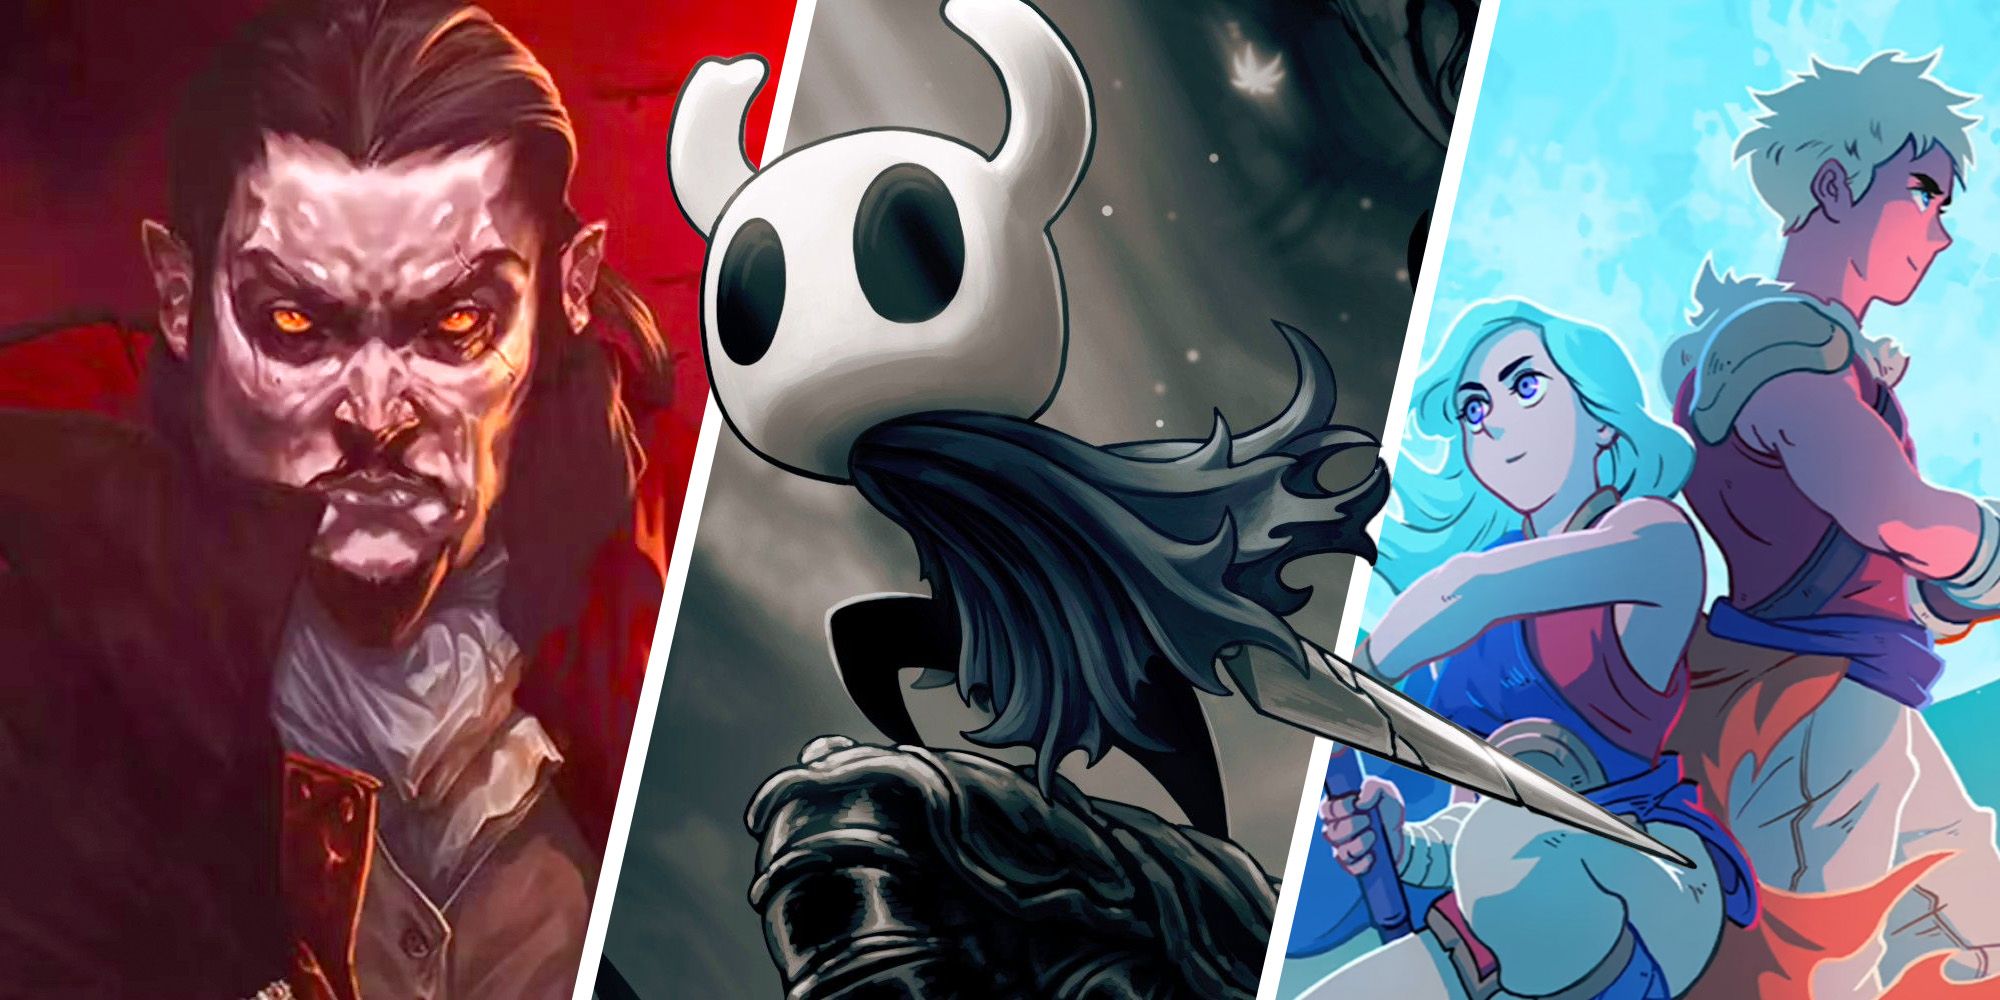 Best 2D Games On Steam - Split Image Of Vampire Survivors, Hollow Knight, And Sea Of Stars-1